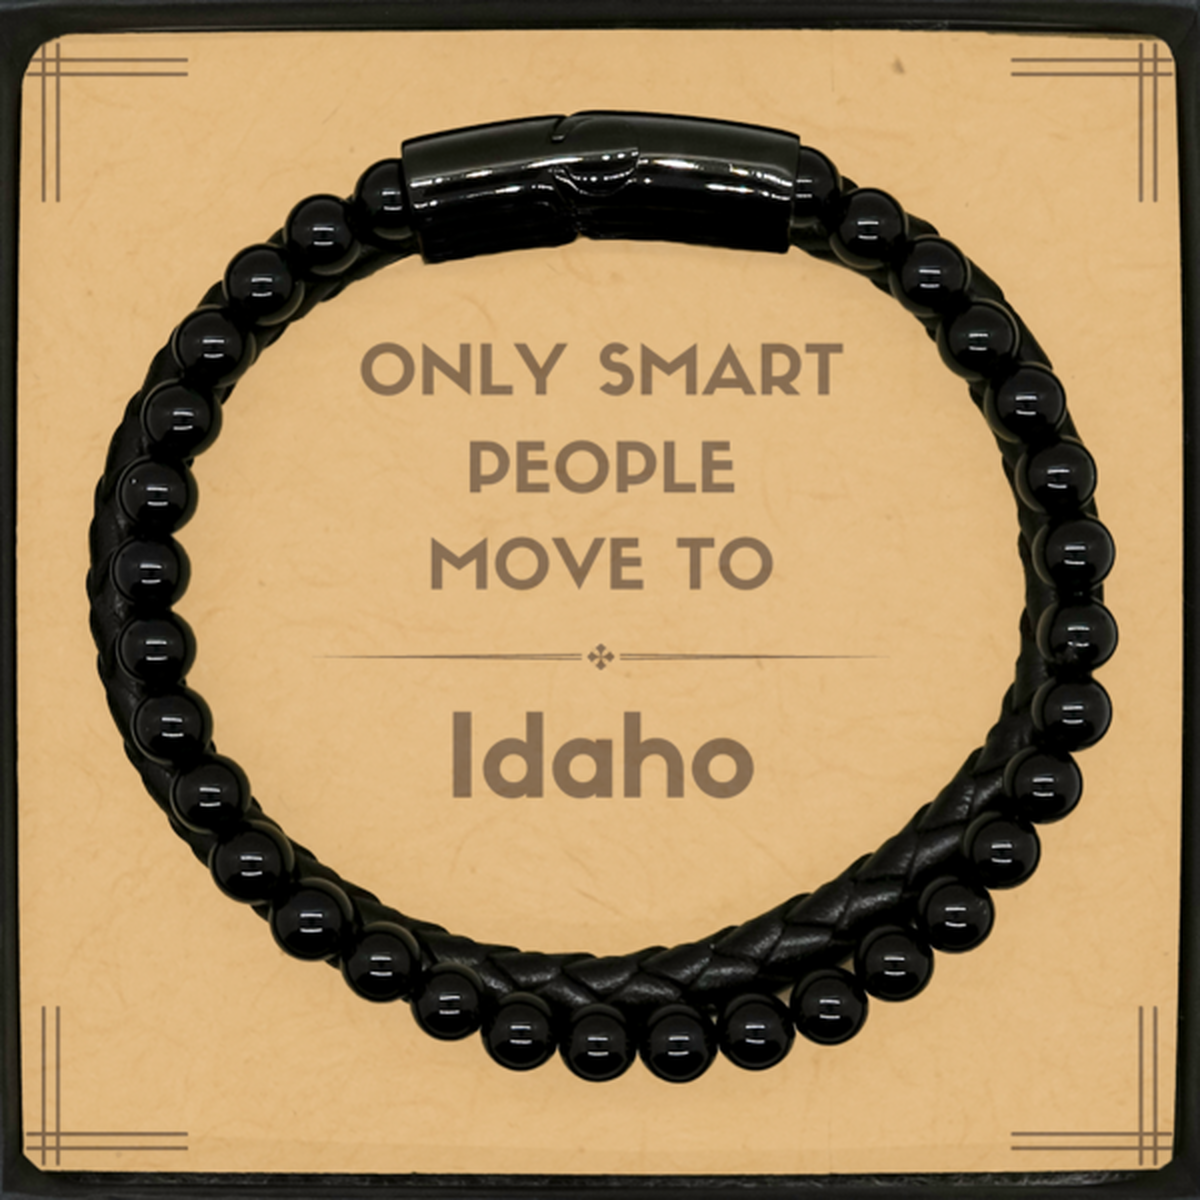 Only smart people move to Idaho Stone Leather Bracelets, Message Card Gifts For Idaho, Move to Idaho Gifts for Friends Coworker Funny Saying Quote